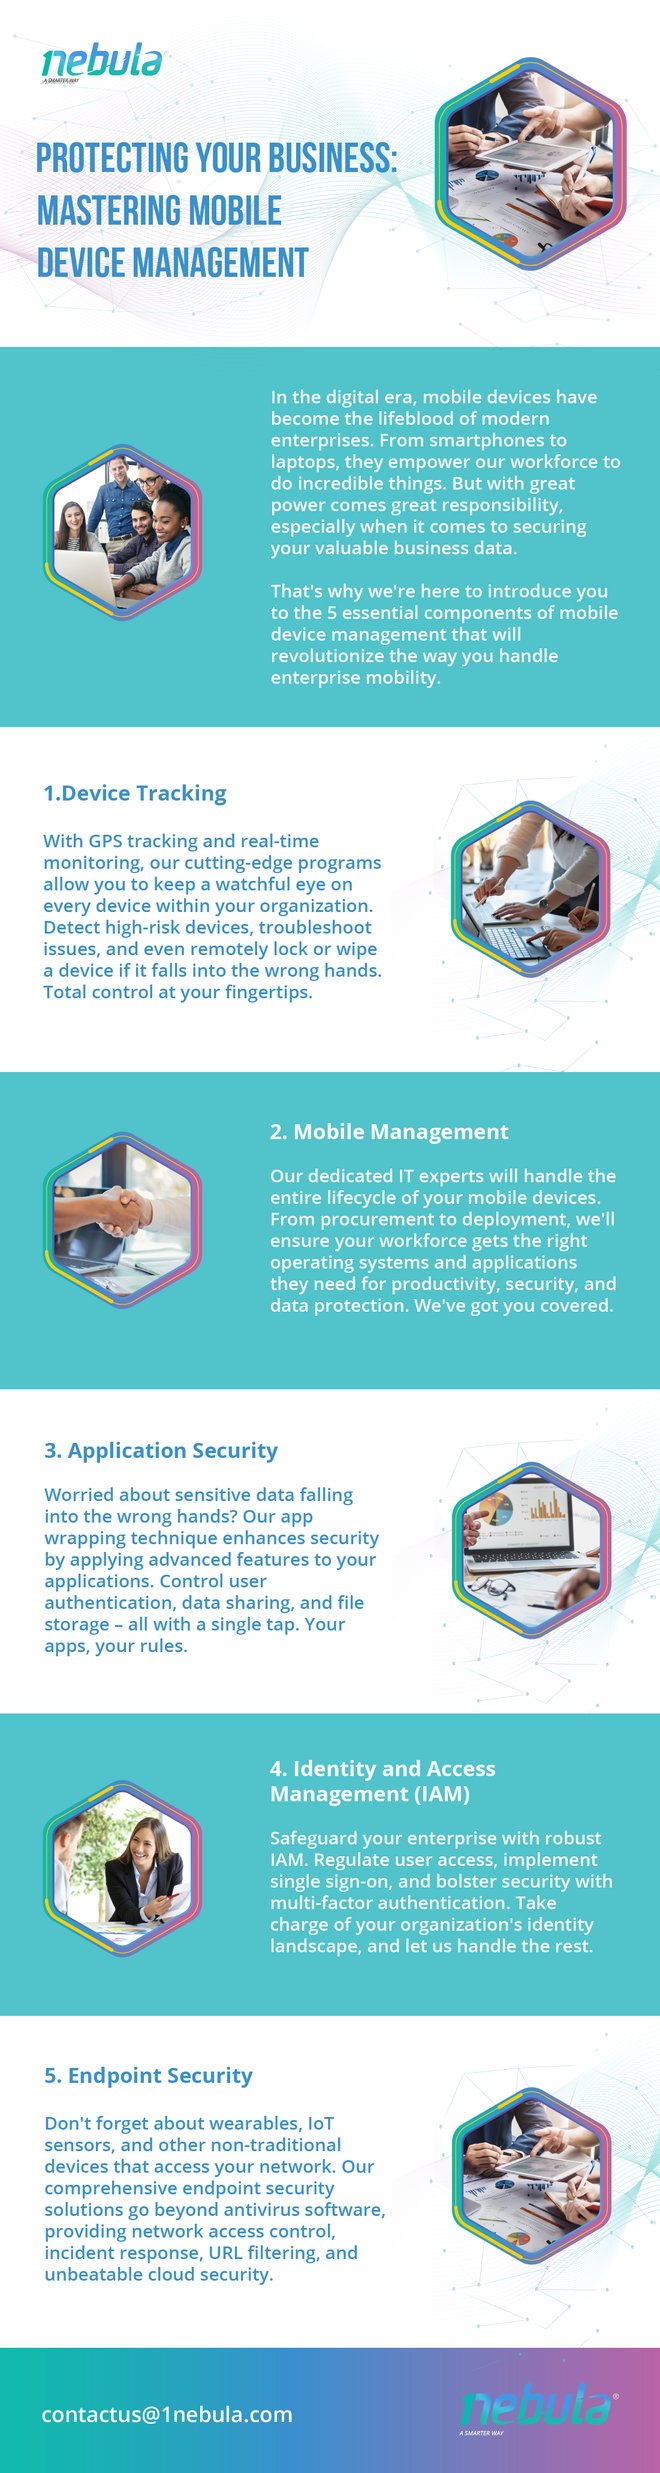 Infographic_Protecting Your Business_Mastering Mobile Device Management-01